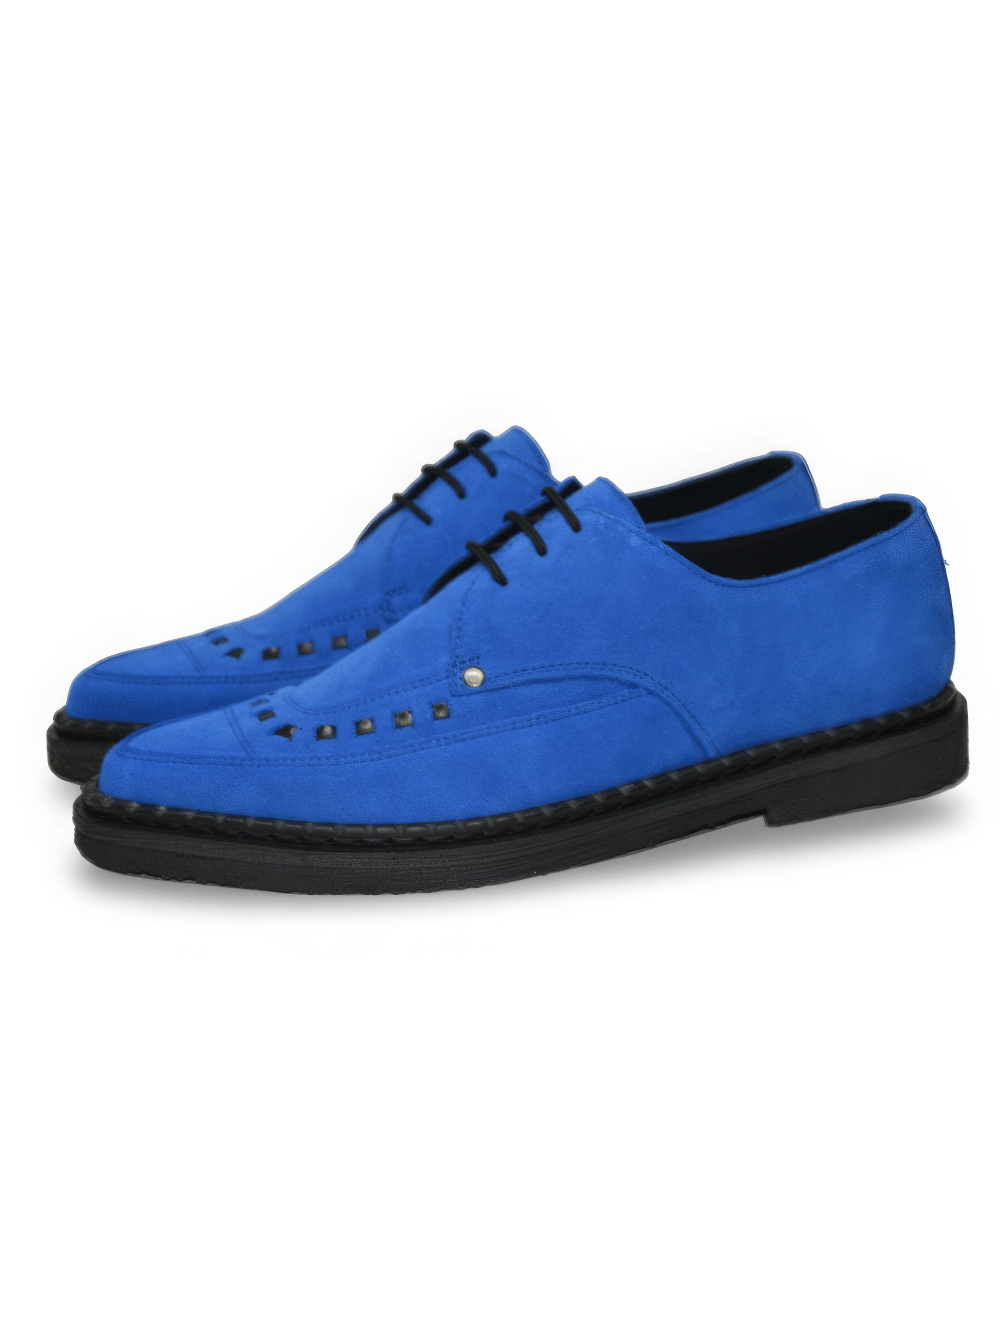 Unisex Blue Suede Pointed Creeper Shoes with Lace-Up Closure